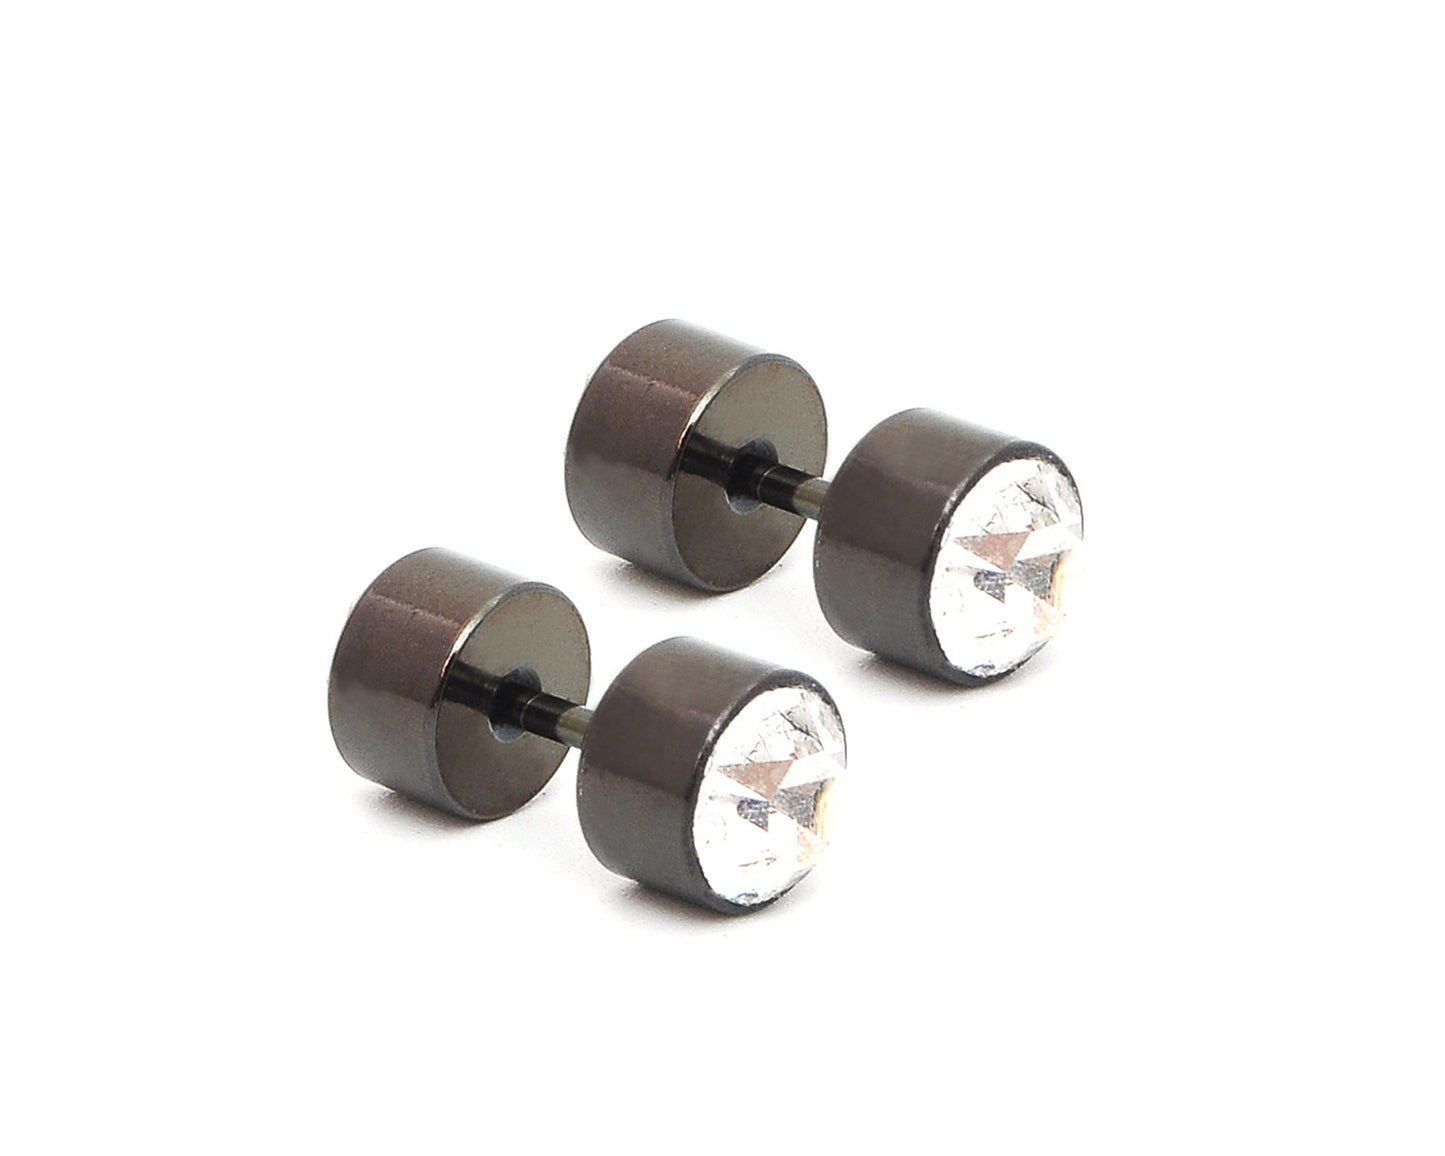 1 Stainless Double Crystal Studs Cylinder Straight Barbell Earrings Body Piercing Jewelry